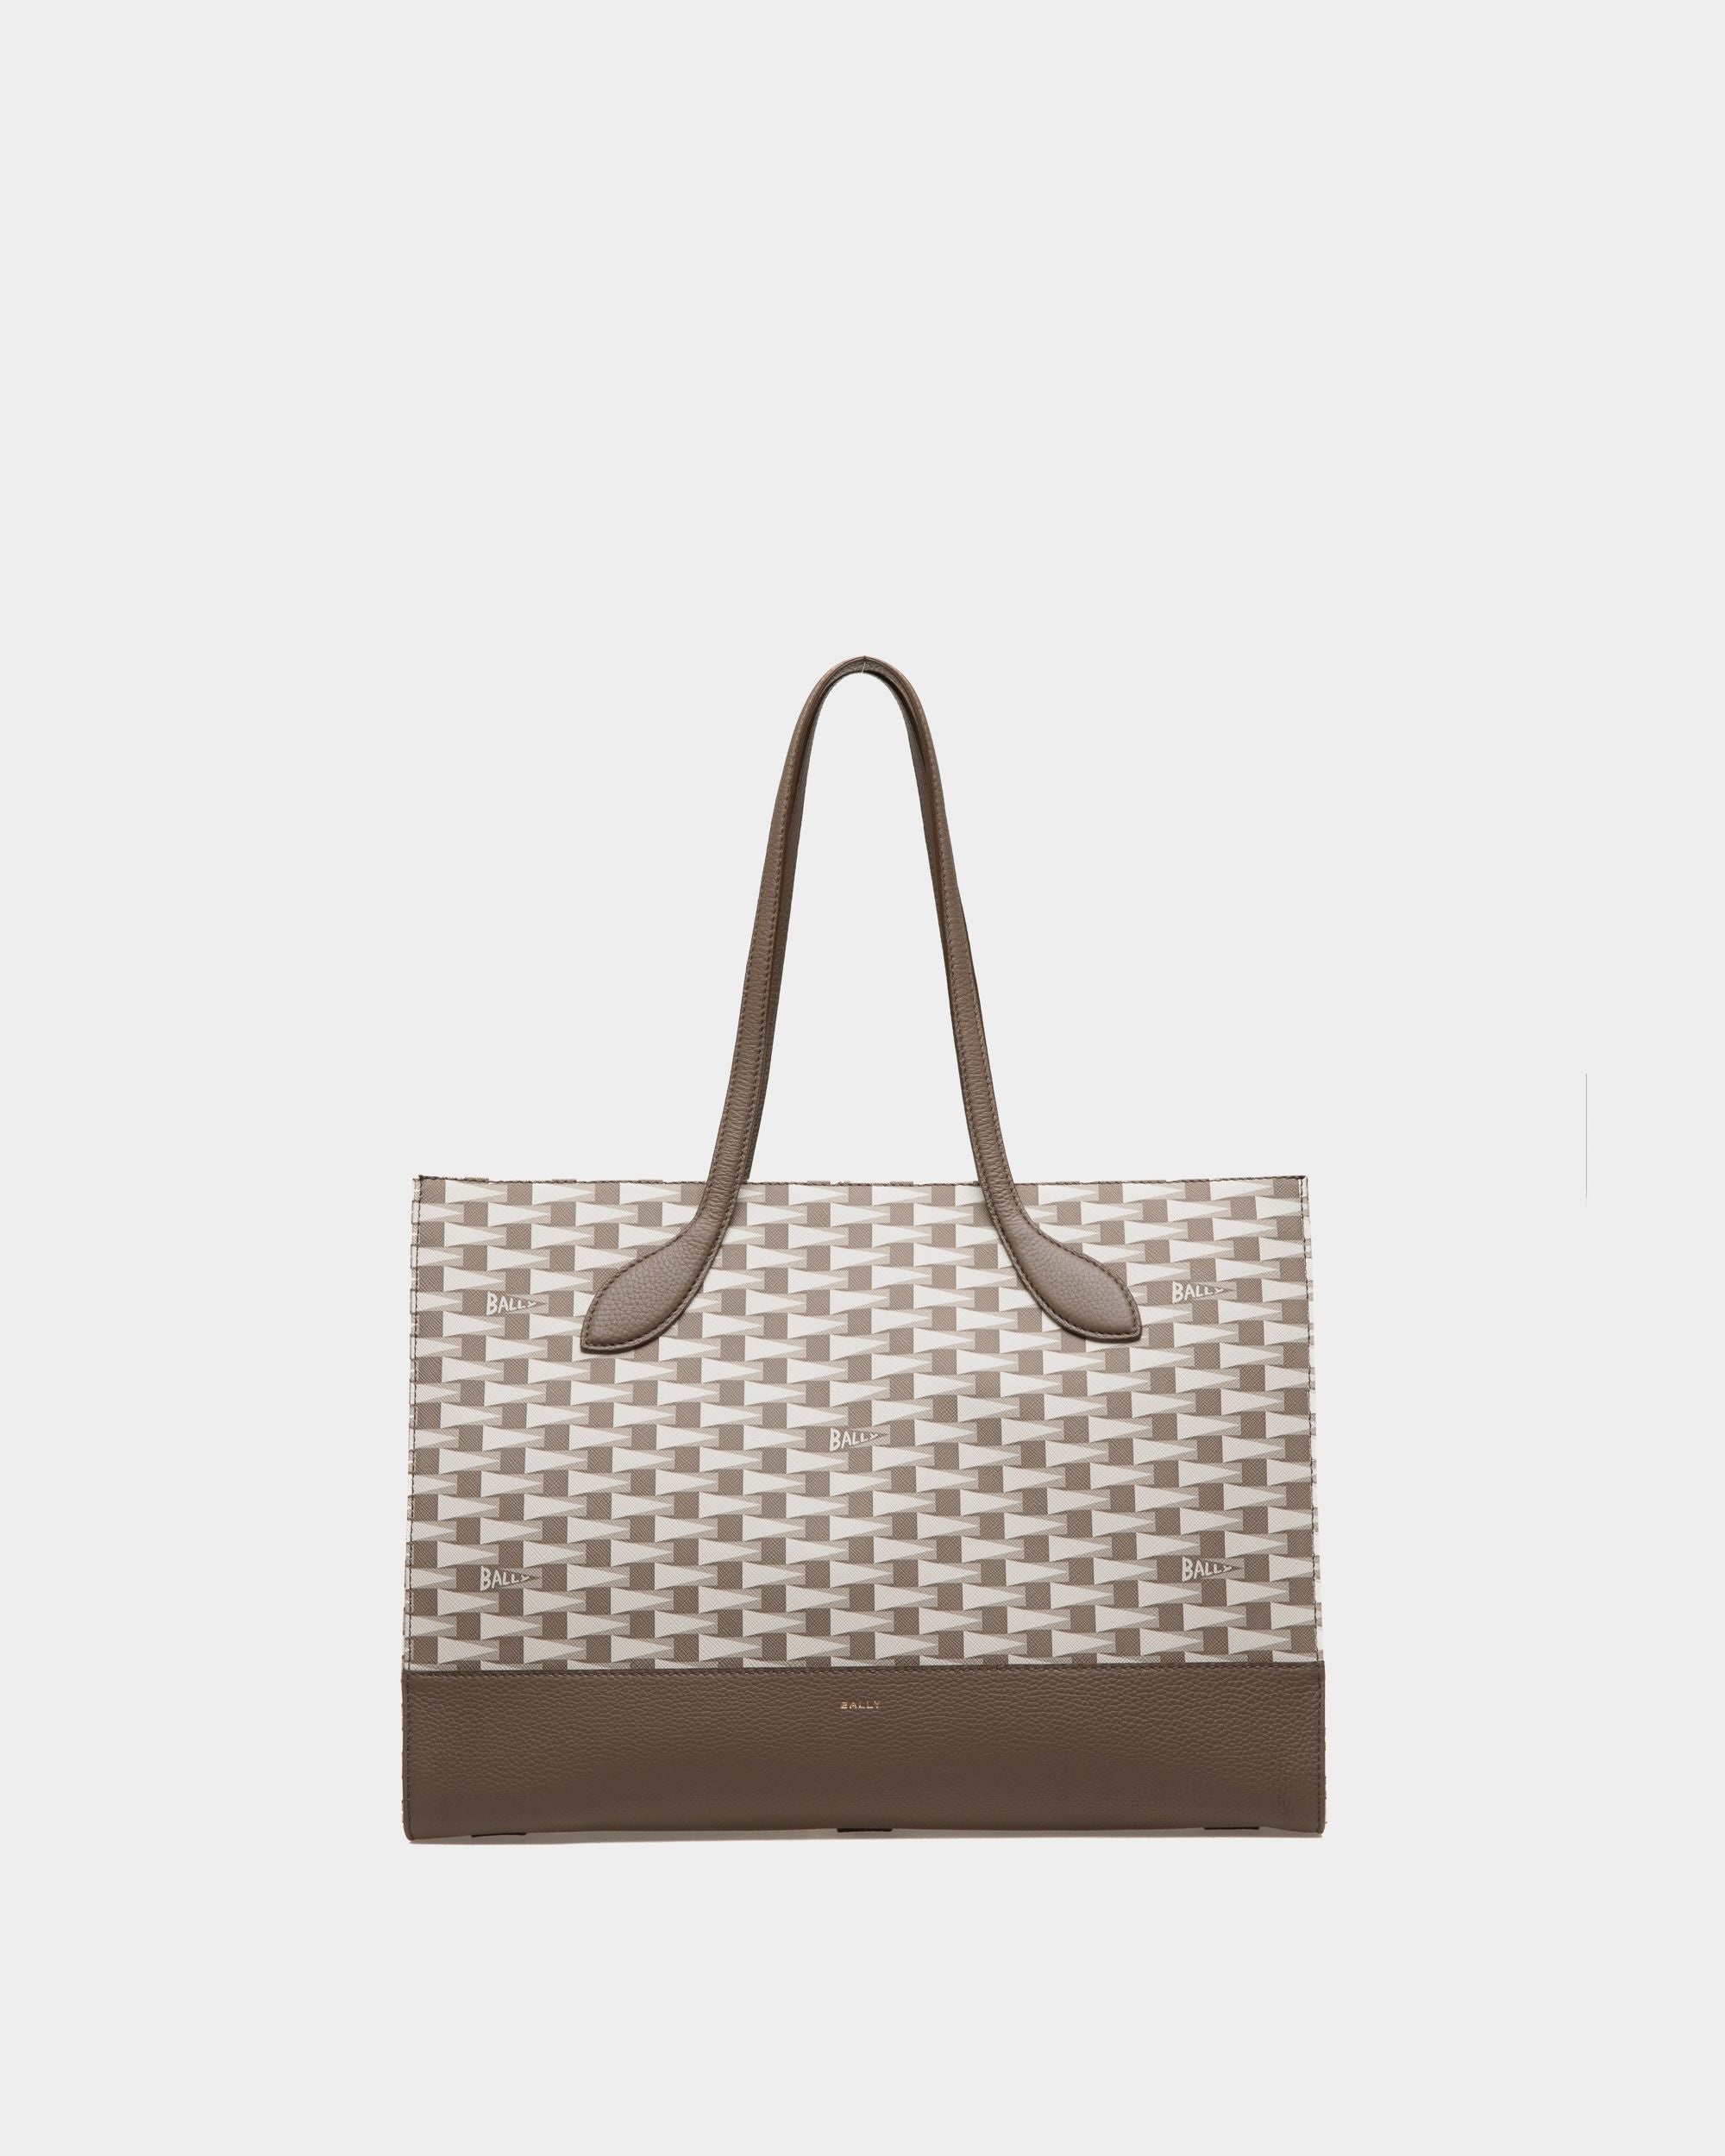 Pennant | Women's Tote Bag in Beige TPU | Bally | Still Life Front